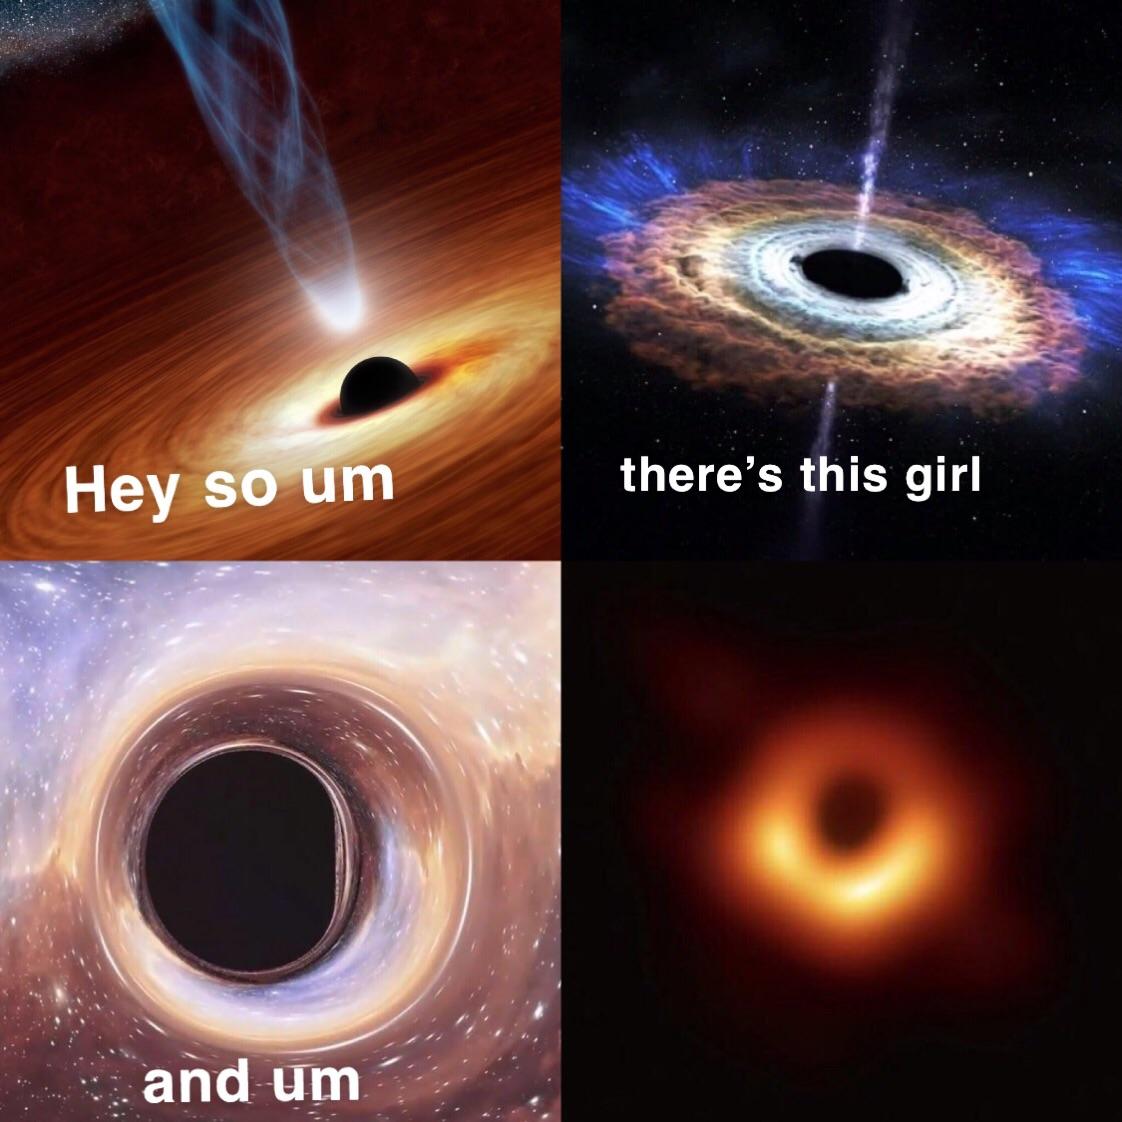 black hole meme with four photos and captions, hey so um, there's this girl, and um.